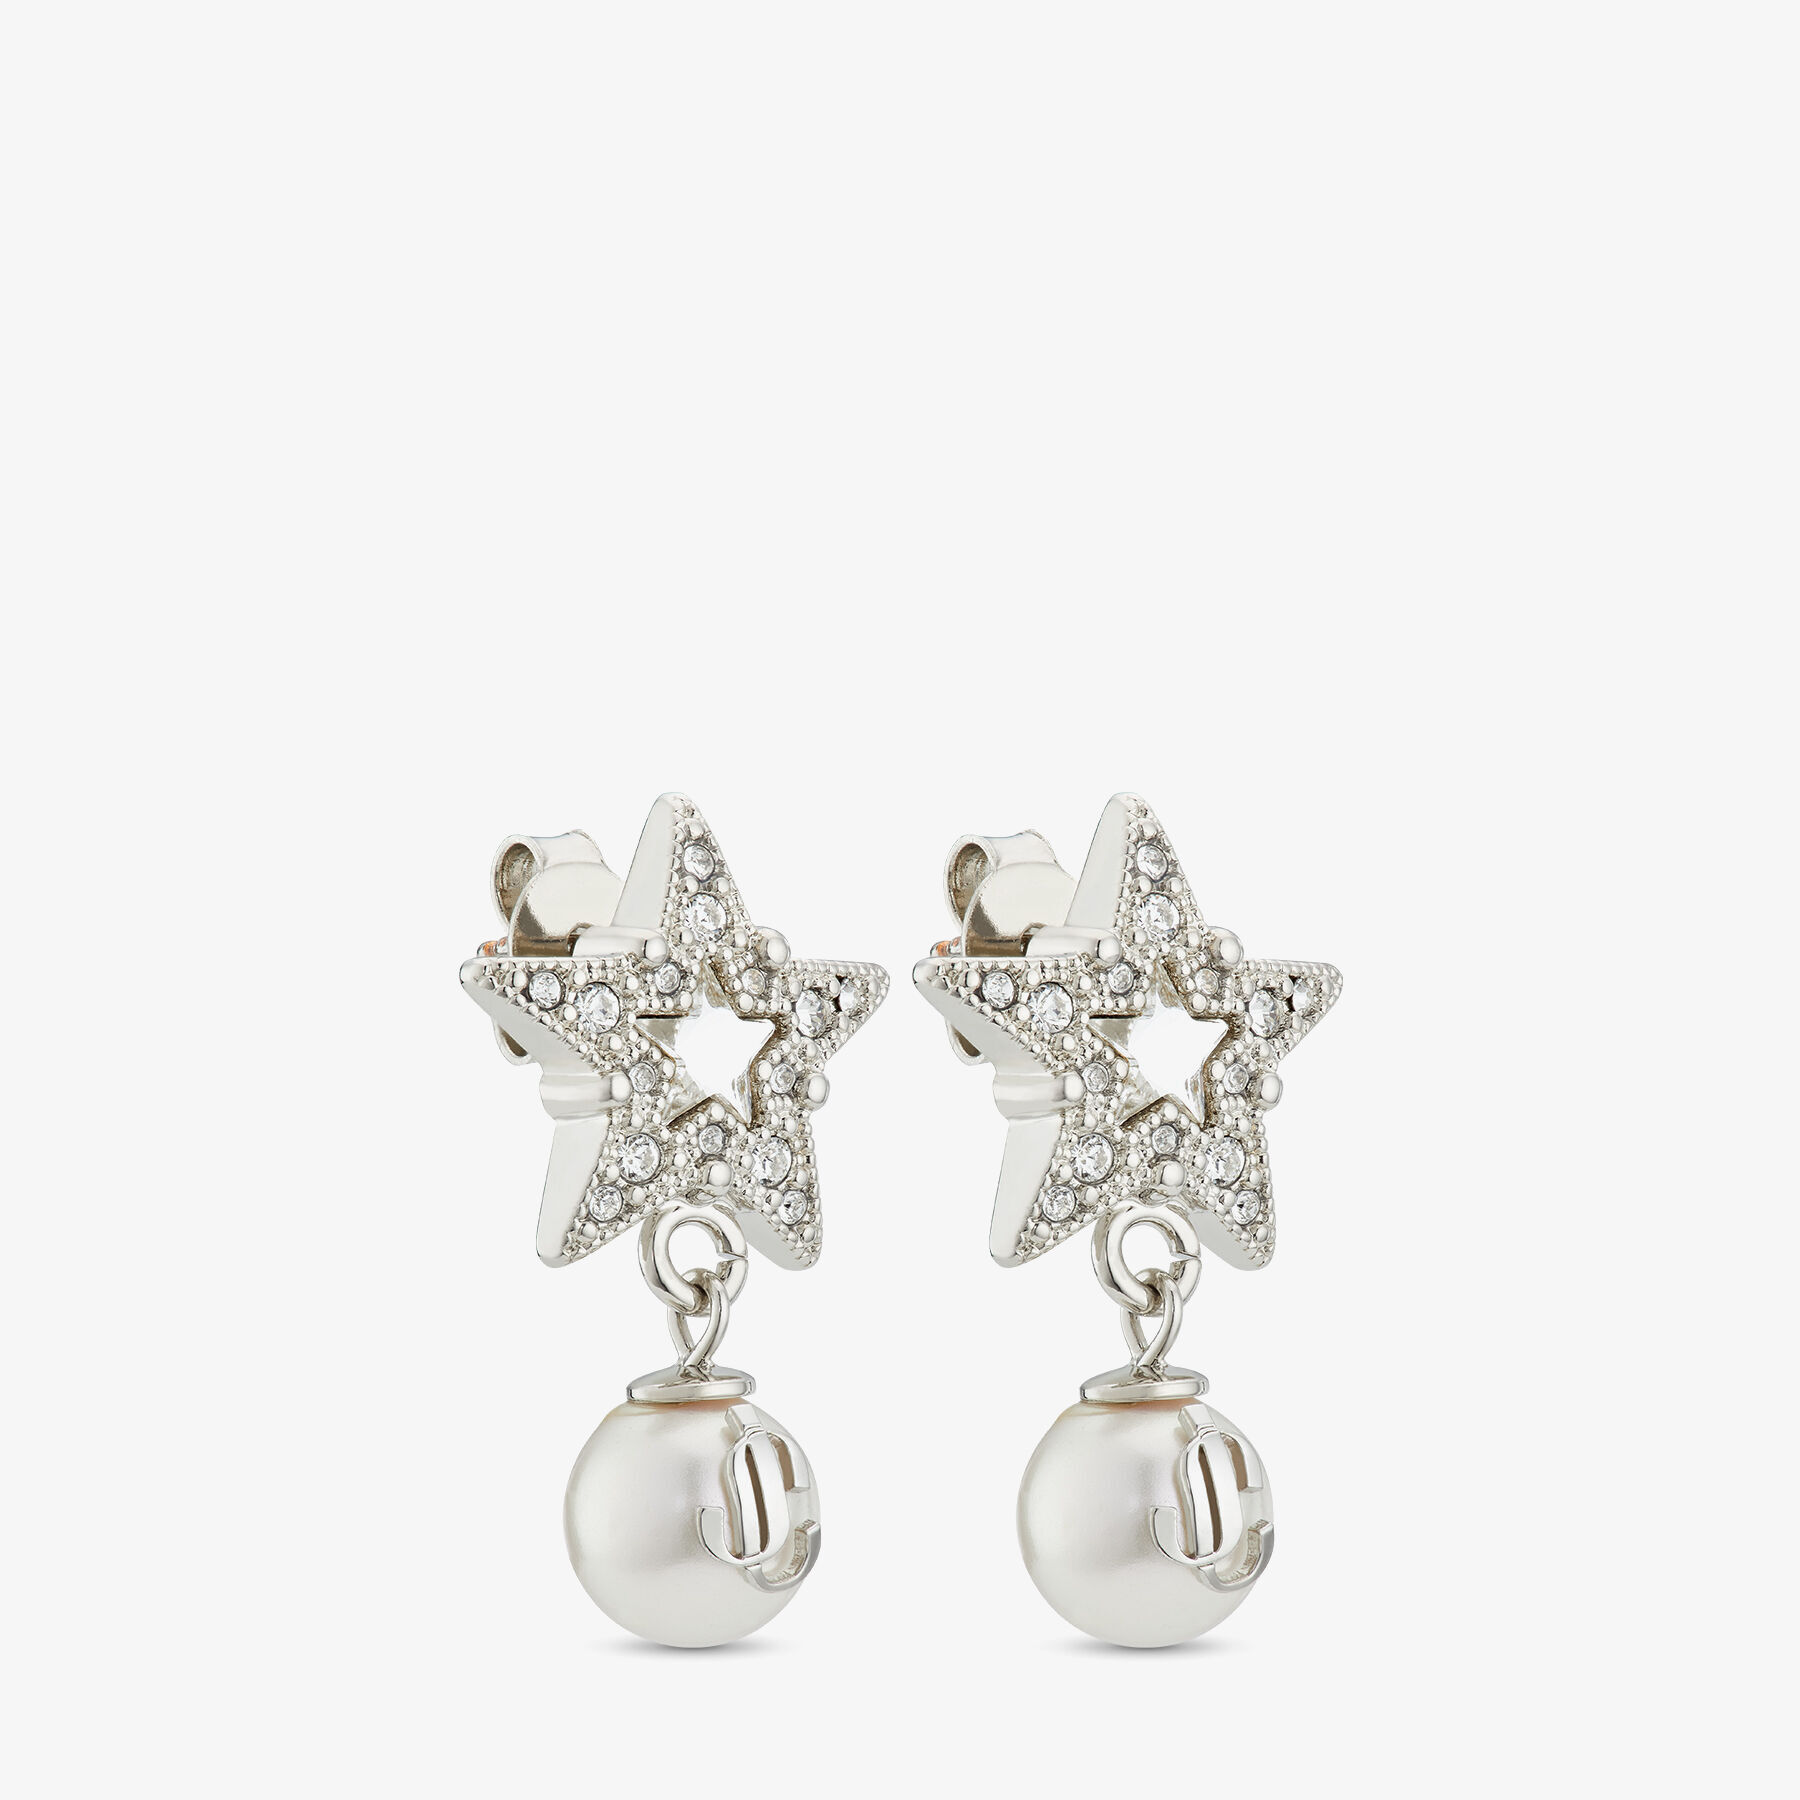 Silver-Finish Metal Star Earrings with White Resin Pearls and 